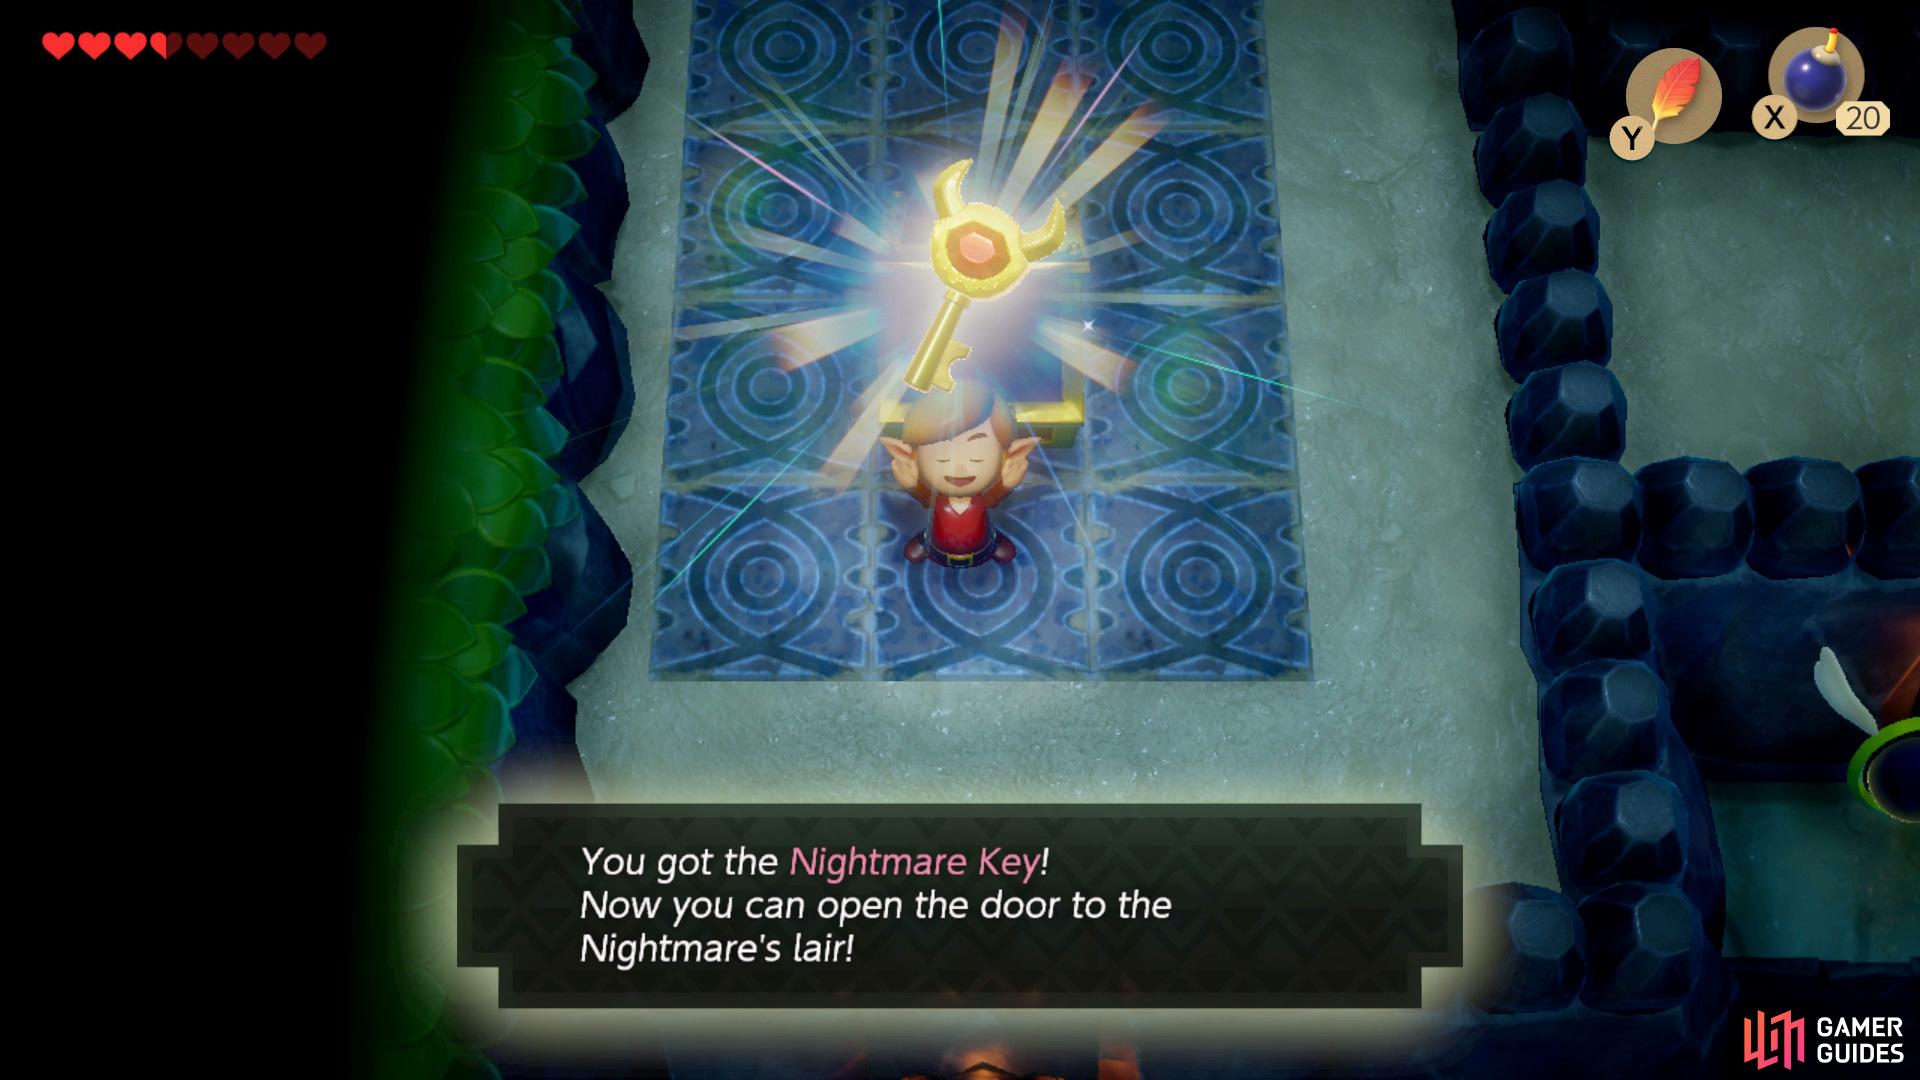 and collect the Nightmare Key from the Chest,